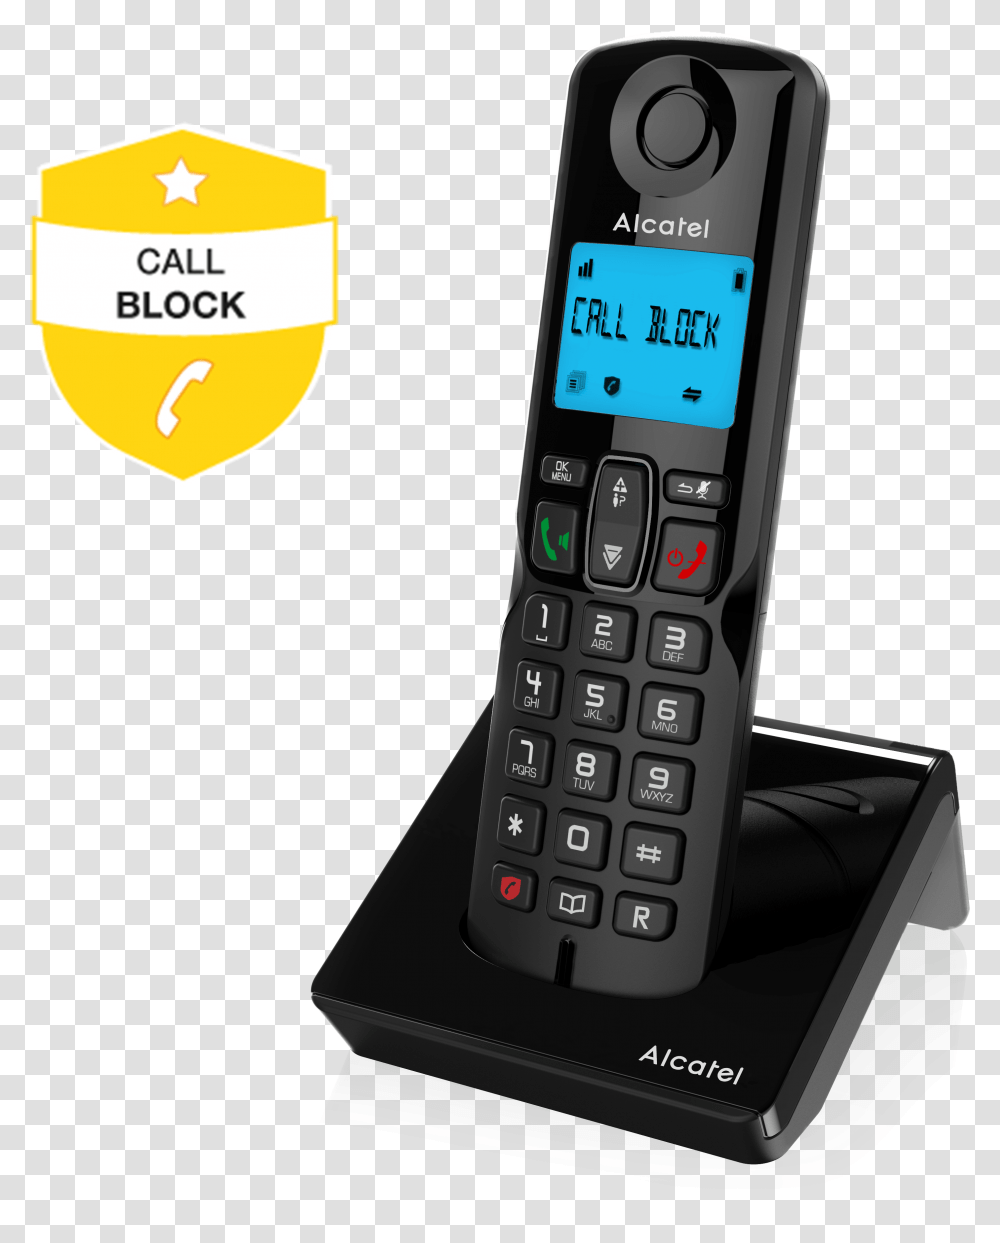 How To Find Missed Calls Wireless Phone Alcatel Dect, Mobile Phone, Electronics, Cell Phone Transparent Png